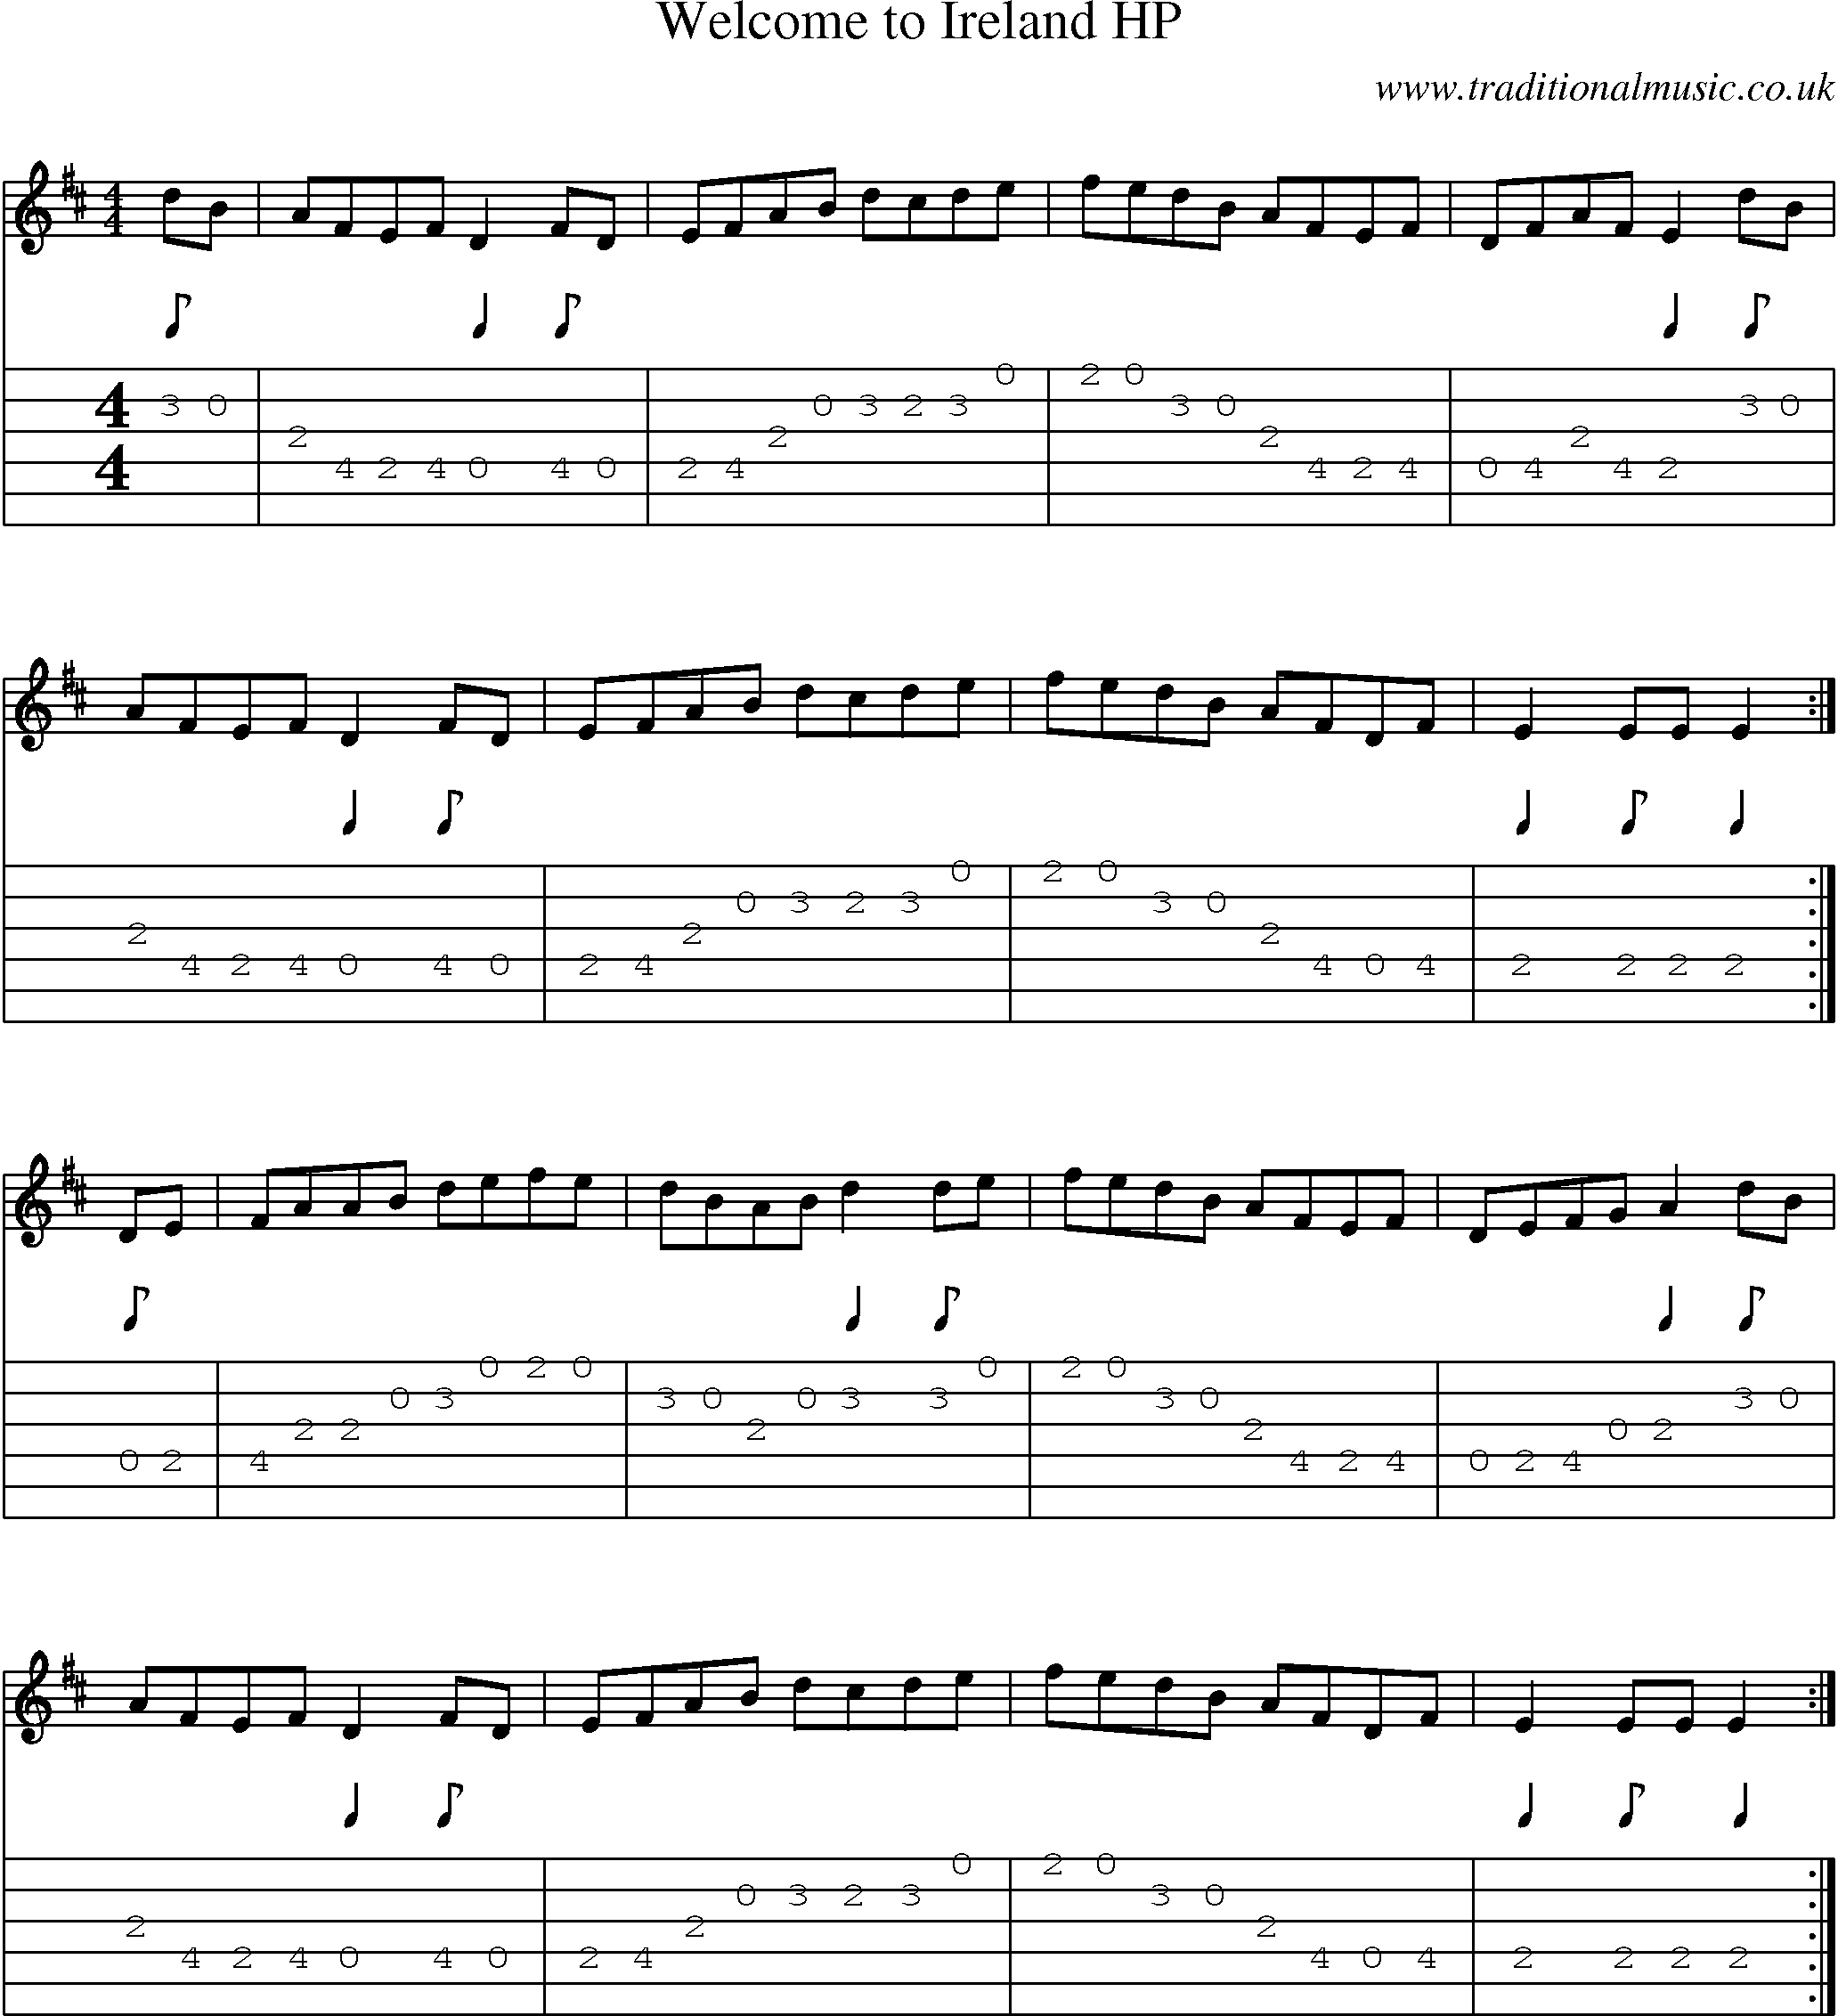 Music Score and Guitar Tabs for Welcome To Ireland